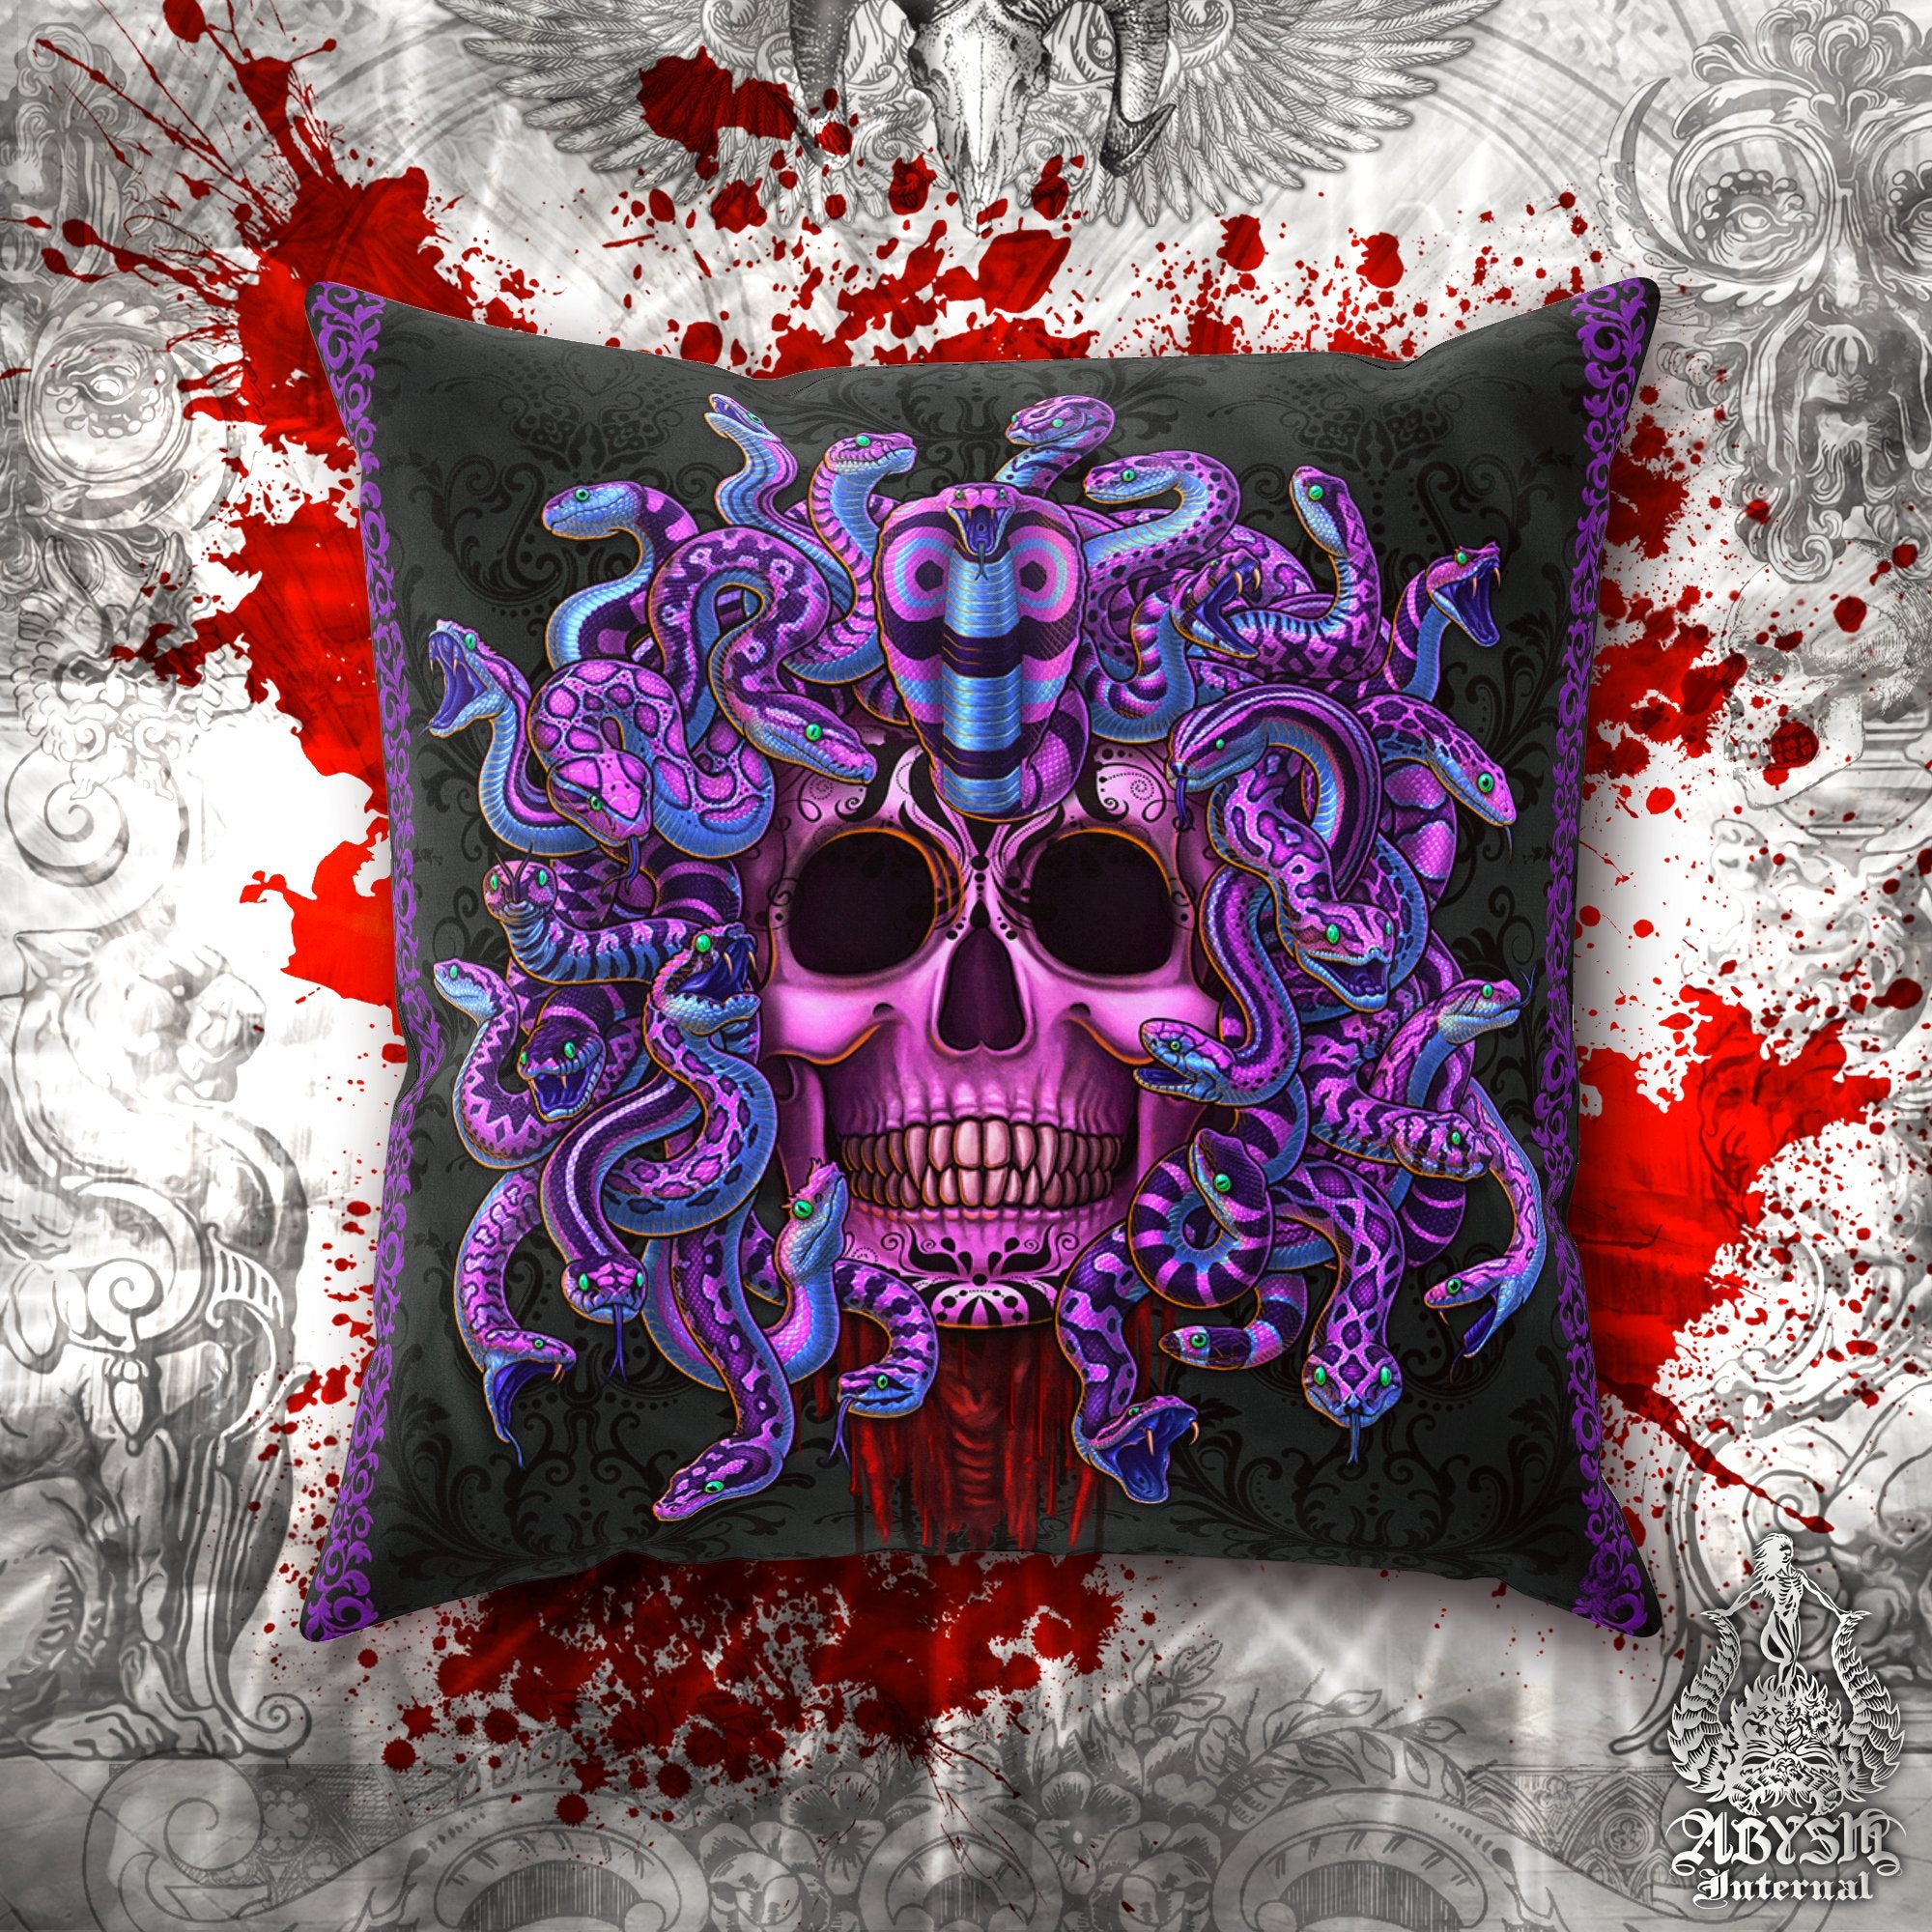 Pastel Goth Throw Pillow, Decorative Accent Pillow, Square Cushion Cover, Medusa Skull, Gothic Room Decor, Psy Art, Alternative Home - Purple, 2 Faces - Abysm Internal